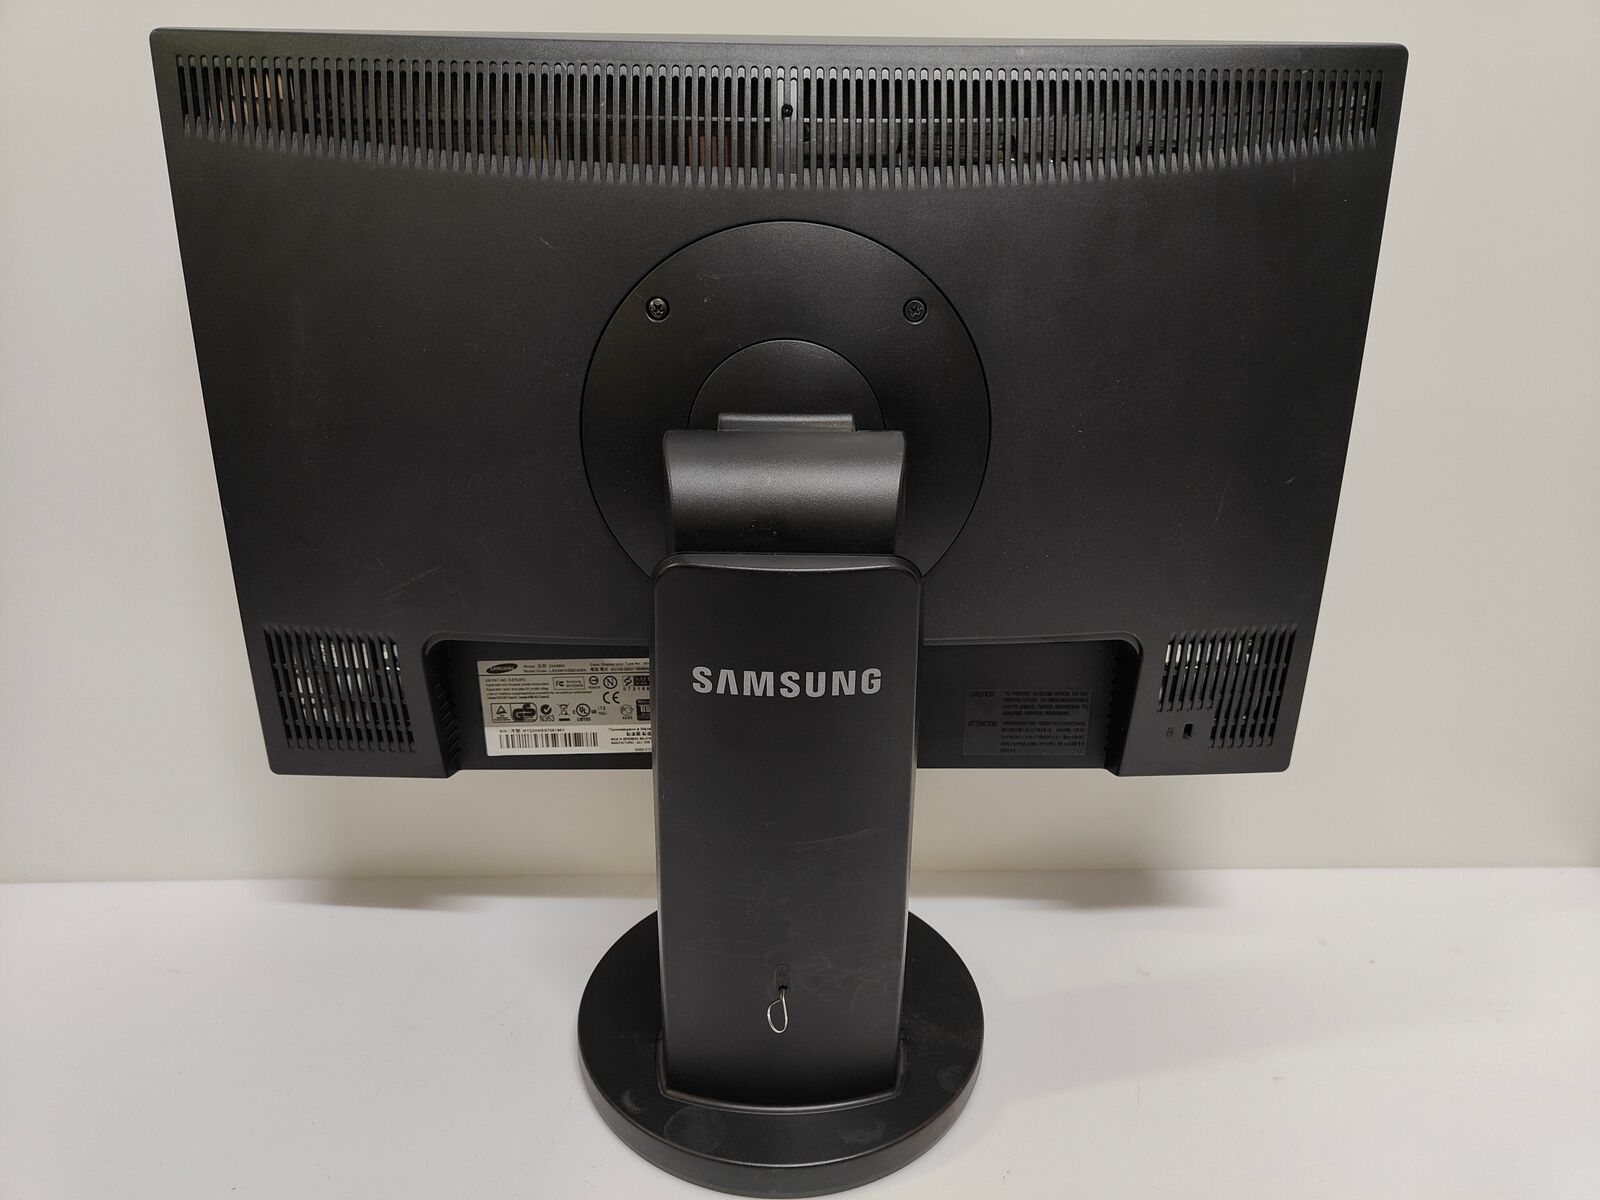 Samsung SyncMaster 2243BW Wide Screen LCD Monitor